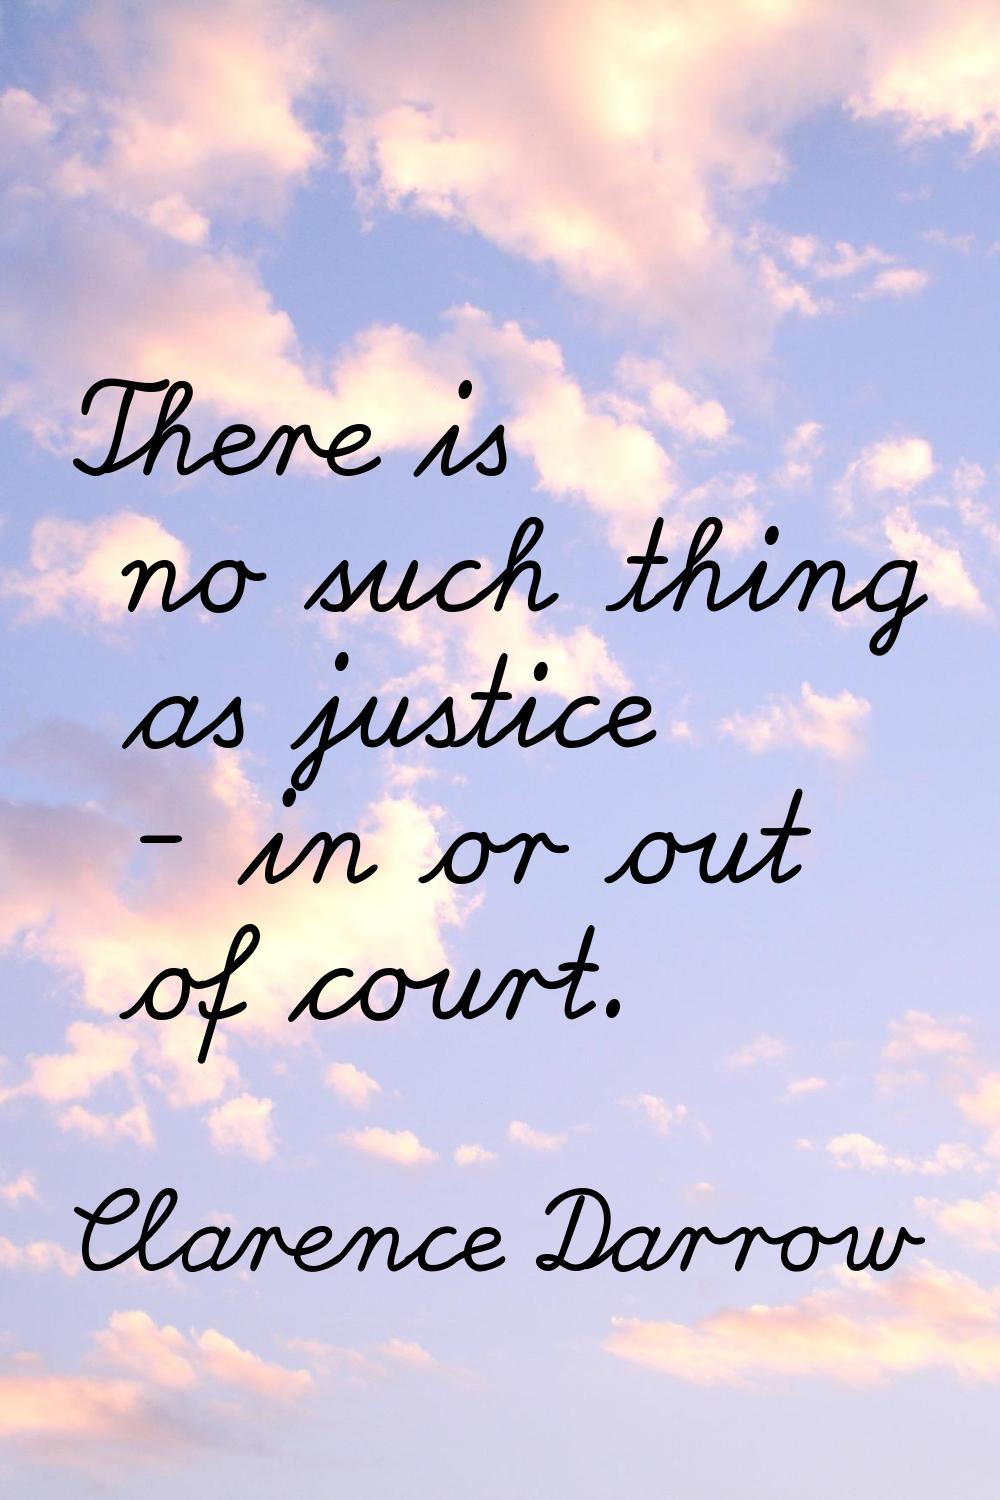 There is no such thing as justice - in or out of court.